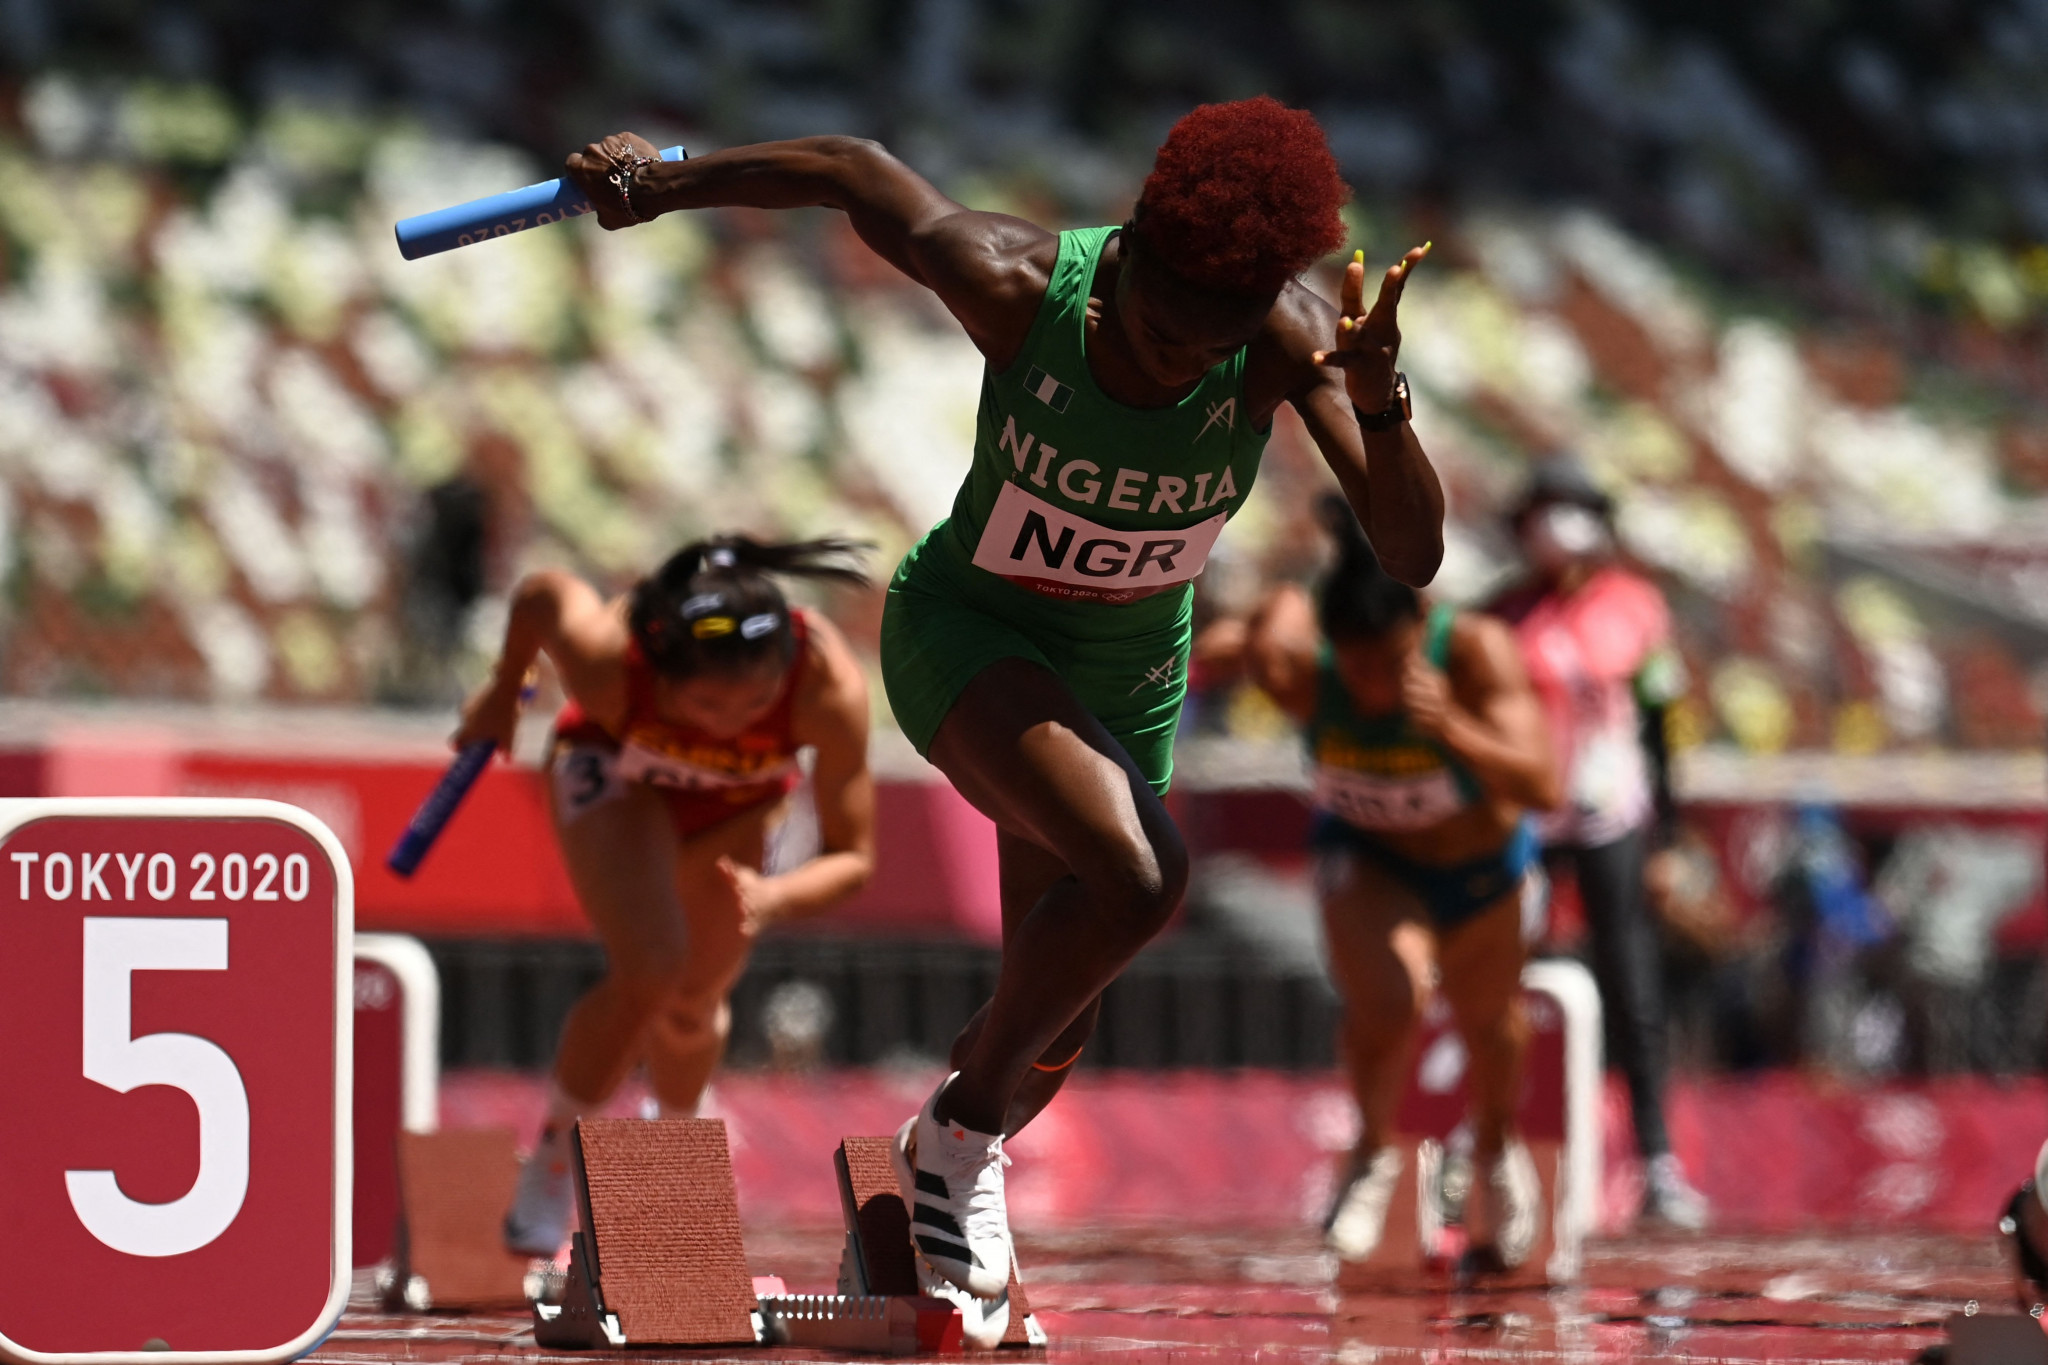 Nigeria and Kenya claim relay victories at African Athletics Championships